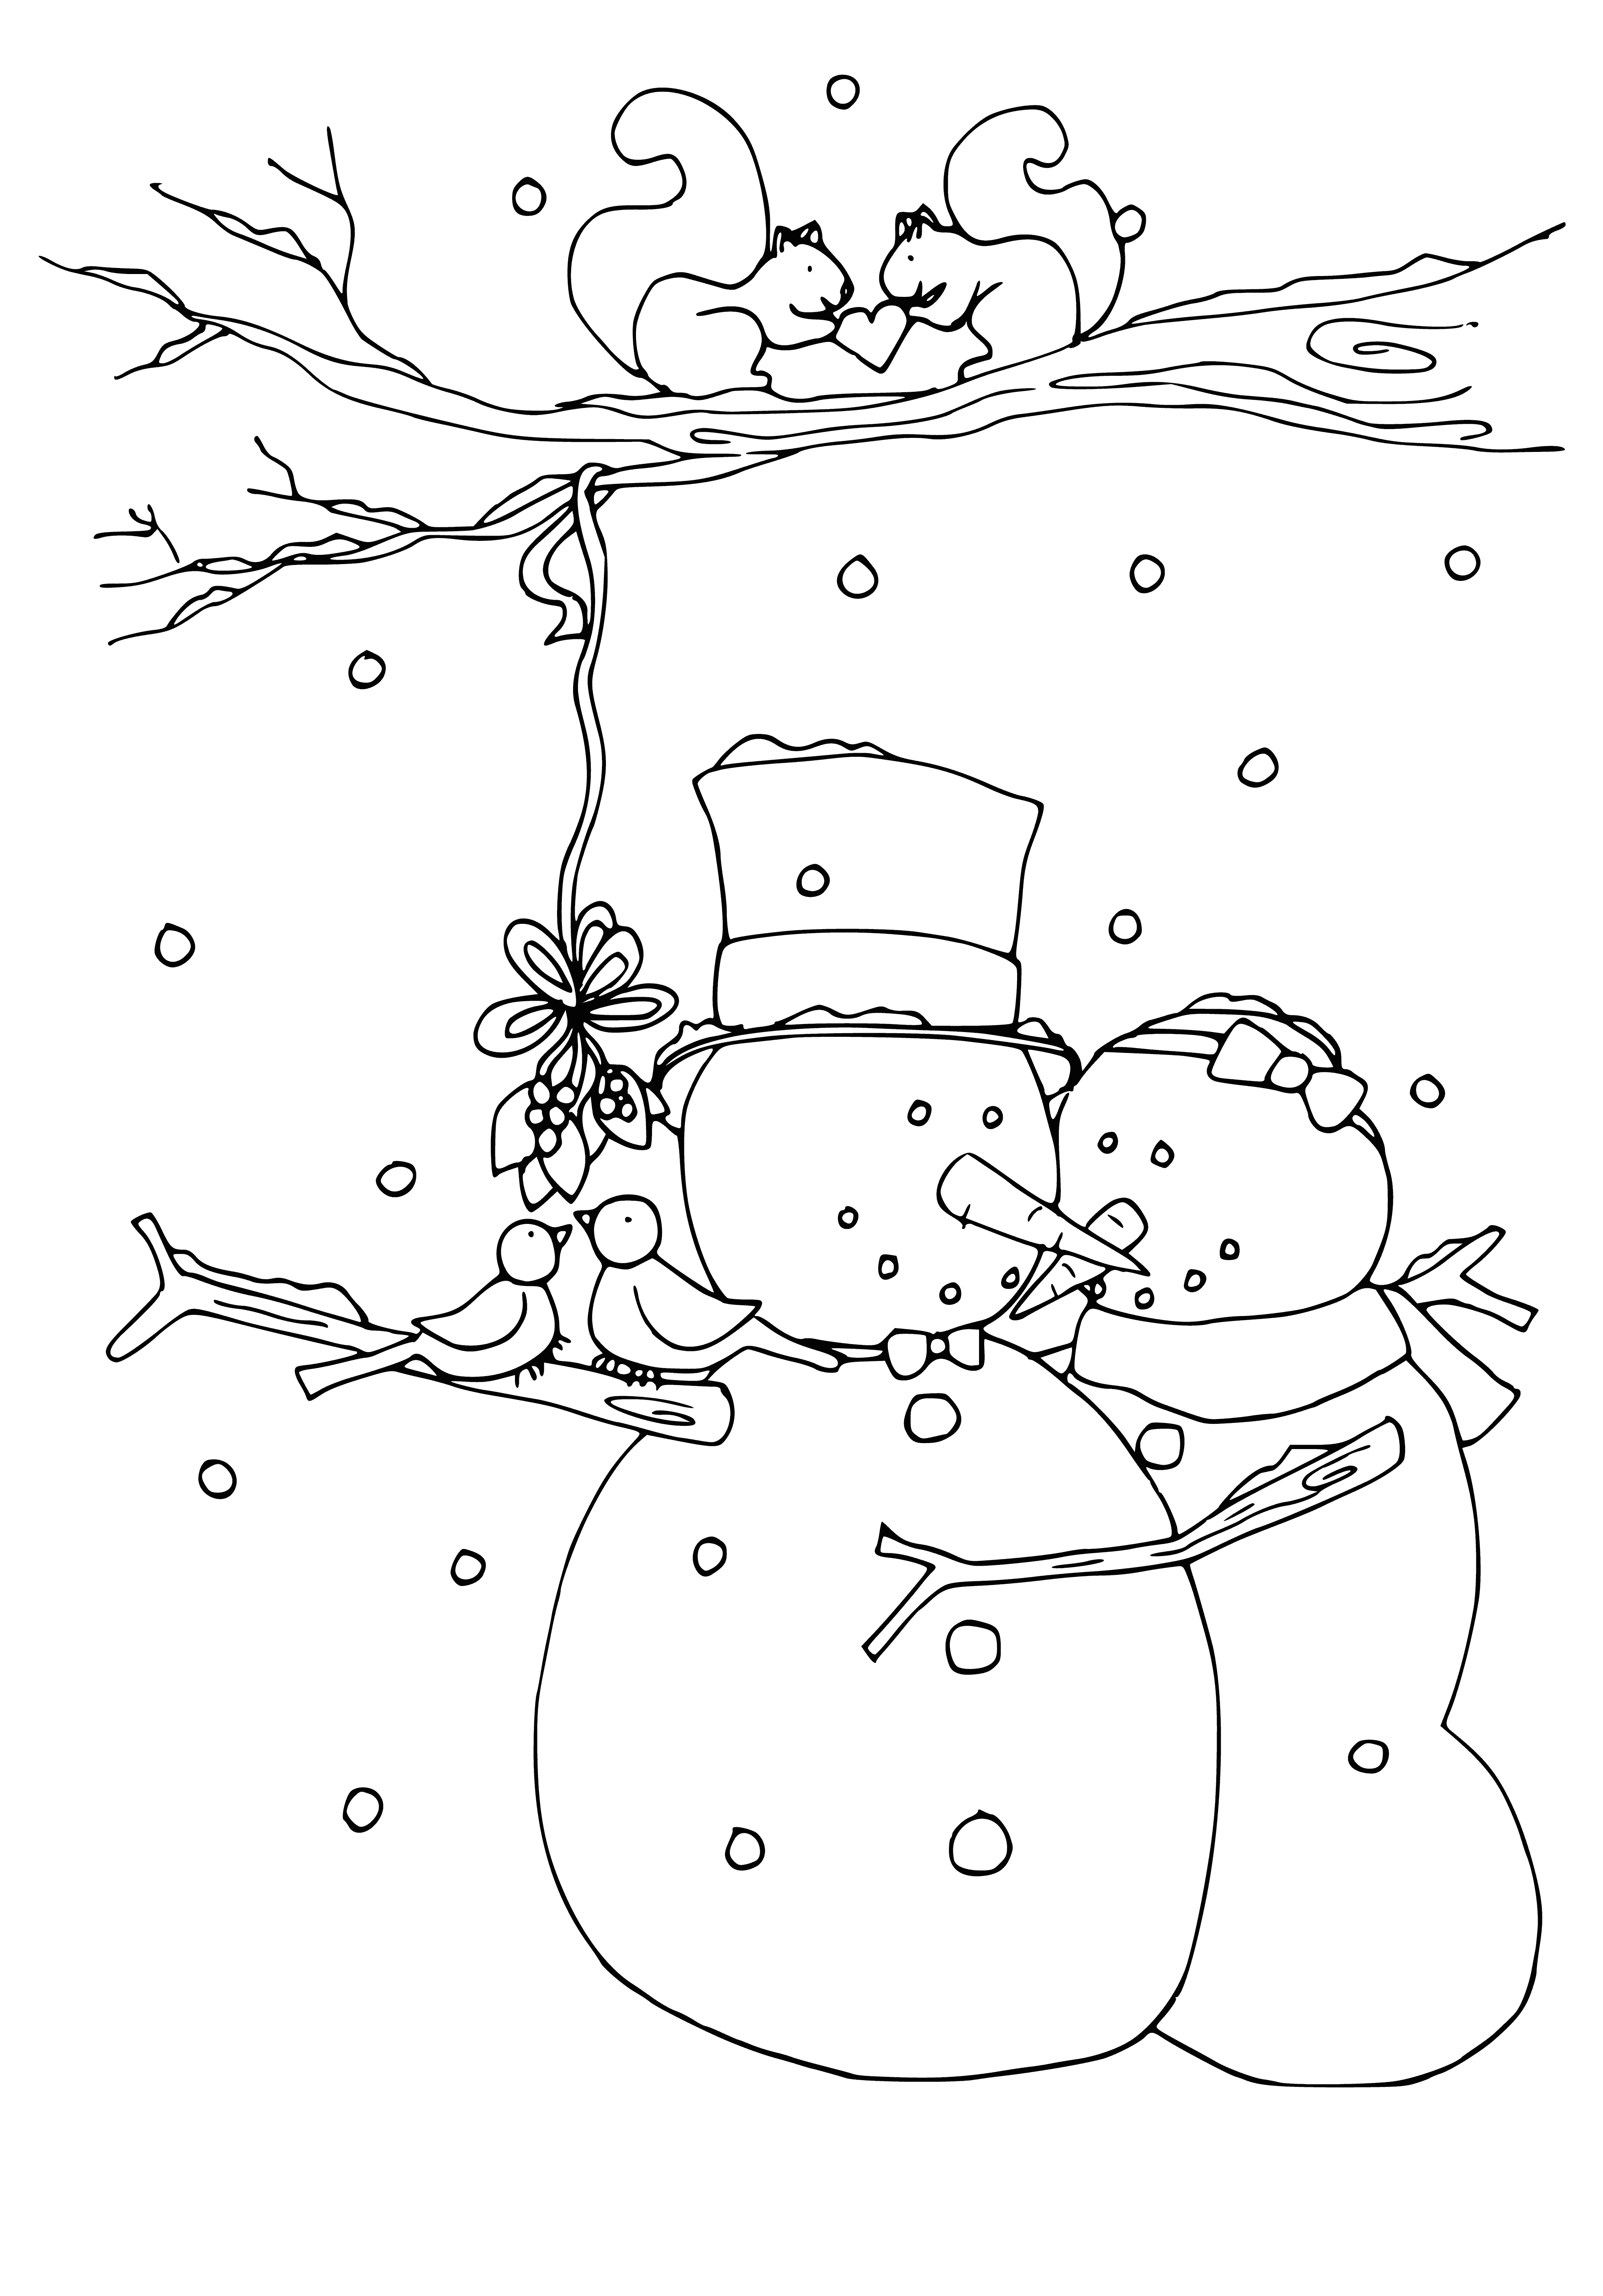 coloring page: Six snowmen standing in a line, tallest in middle. All have coal eyes, mouths, carrot noses. Two with pinecone arms, four with sticks. All have hats, two have scarves. Ground covered in snow. #creativewriting